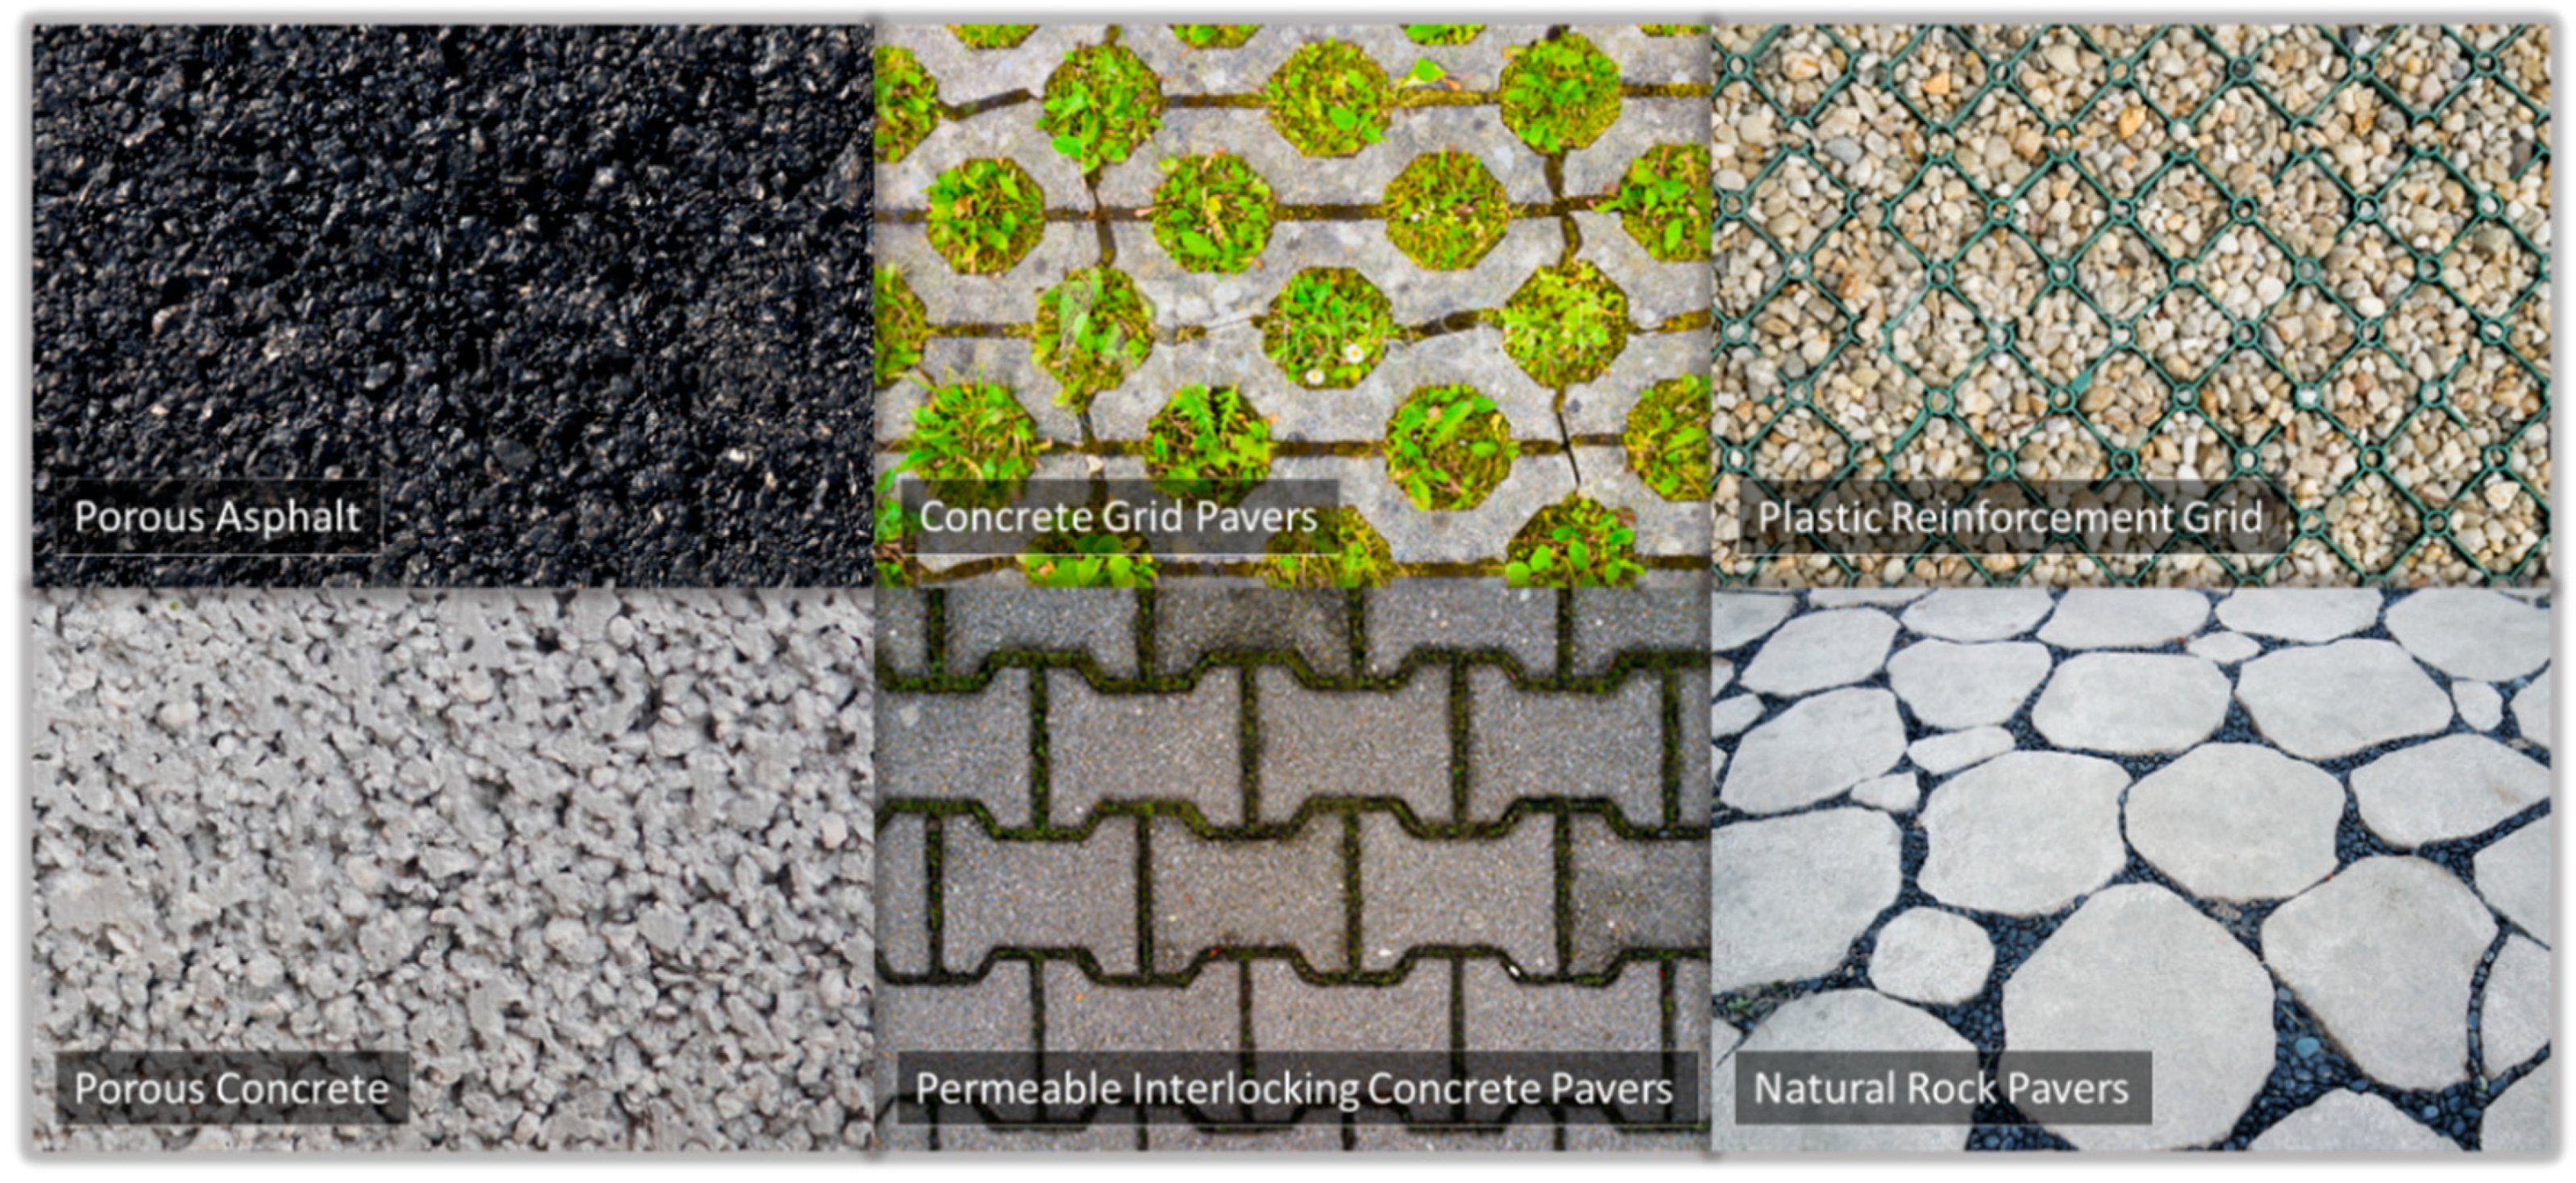 Design, application and performance improvement of Eco-Permeable